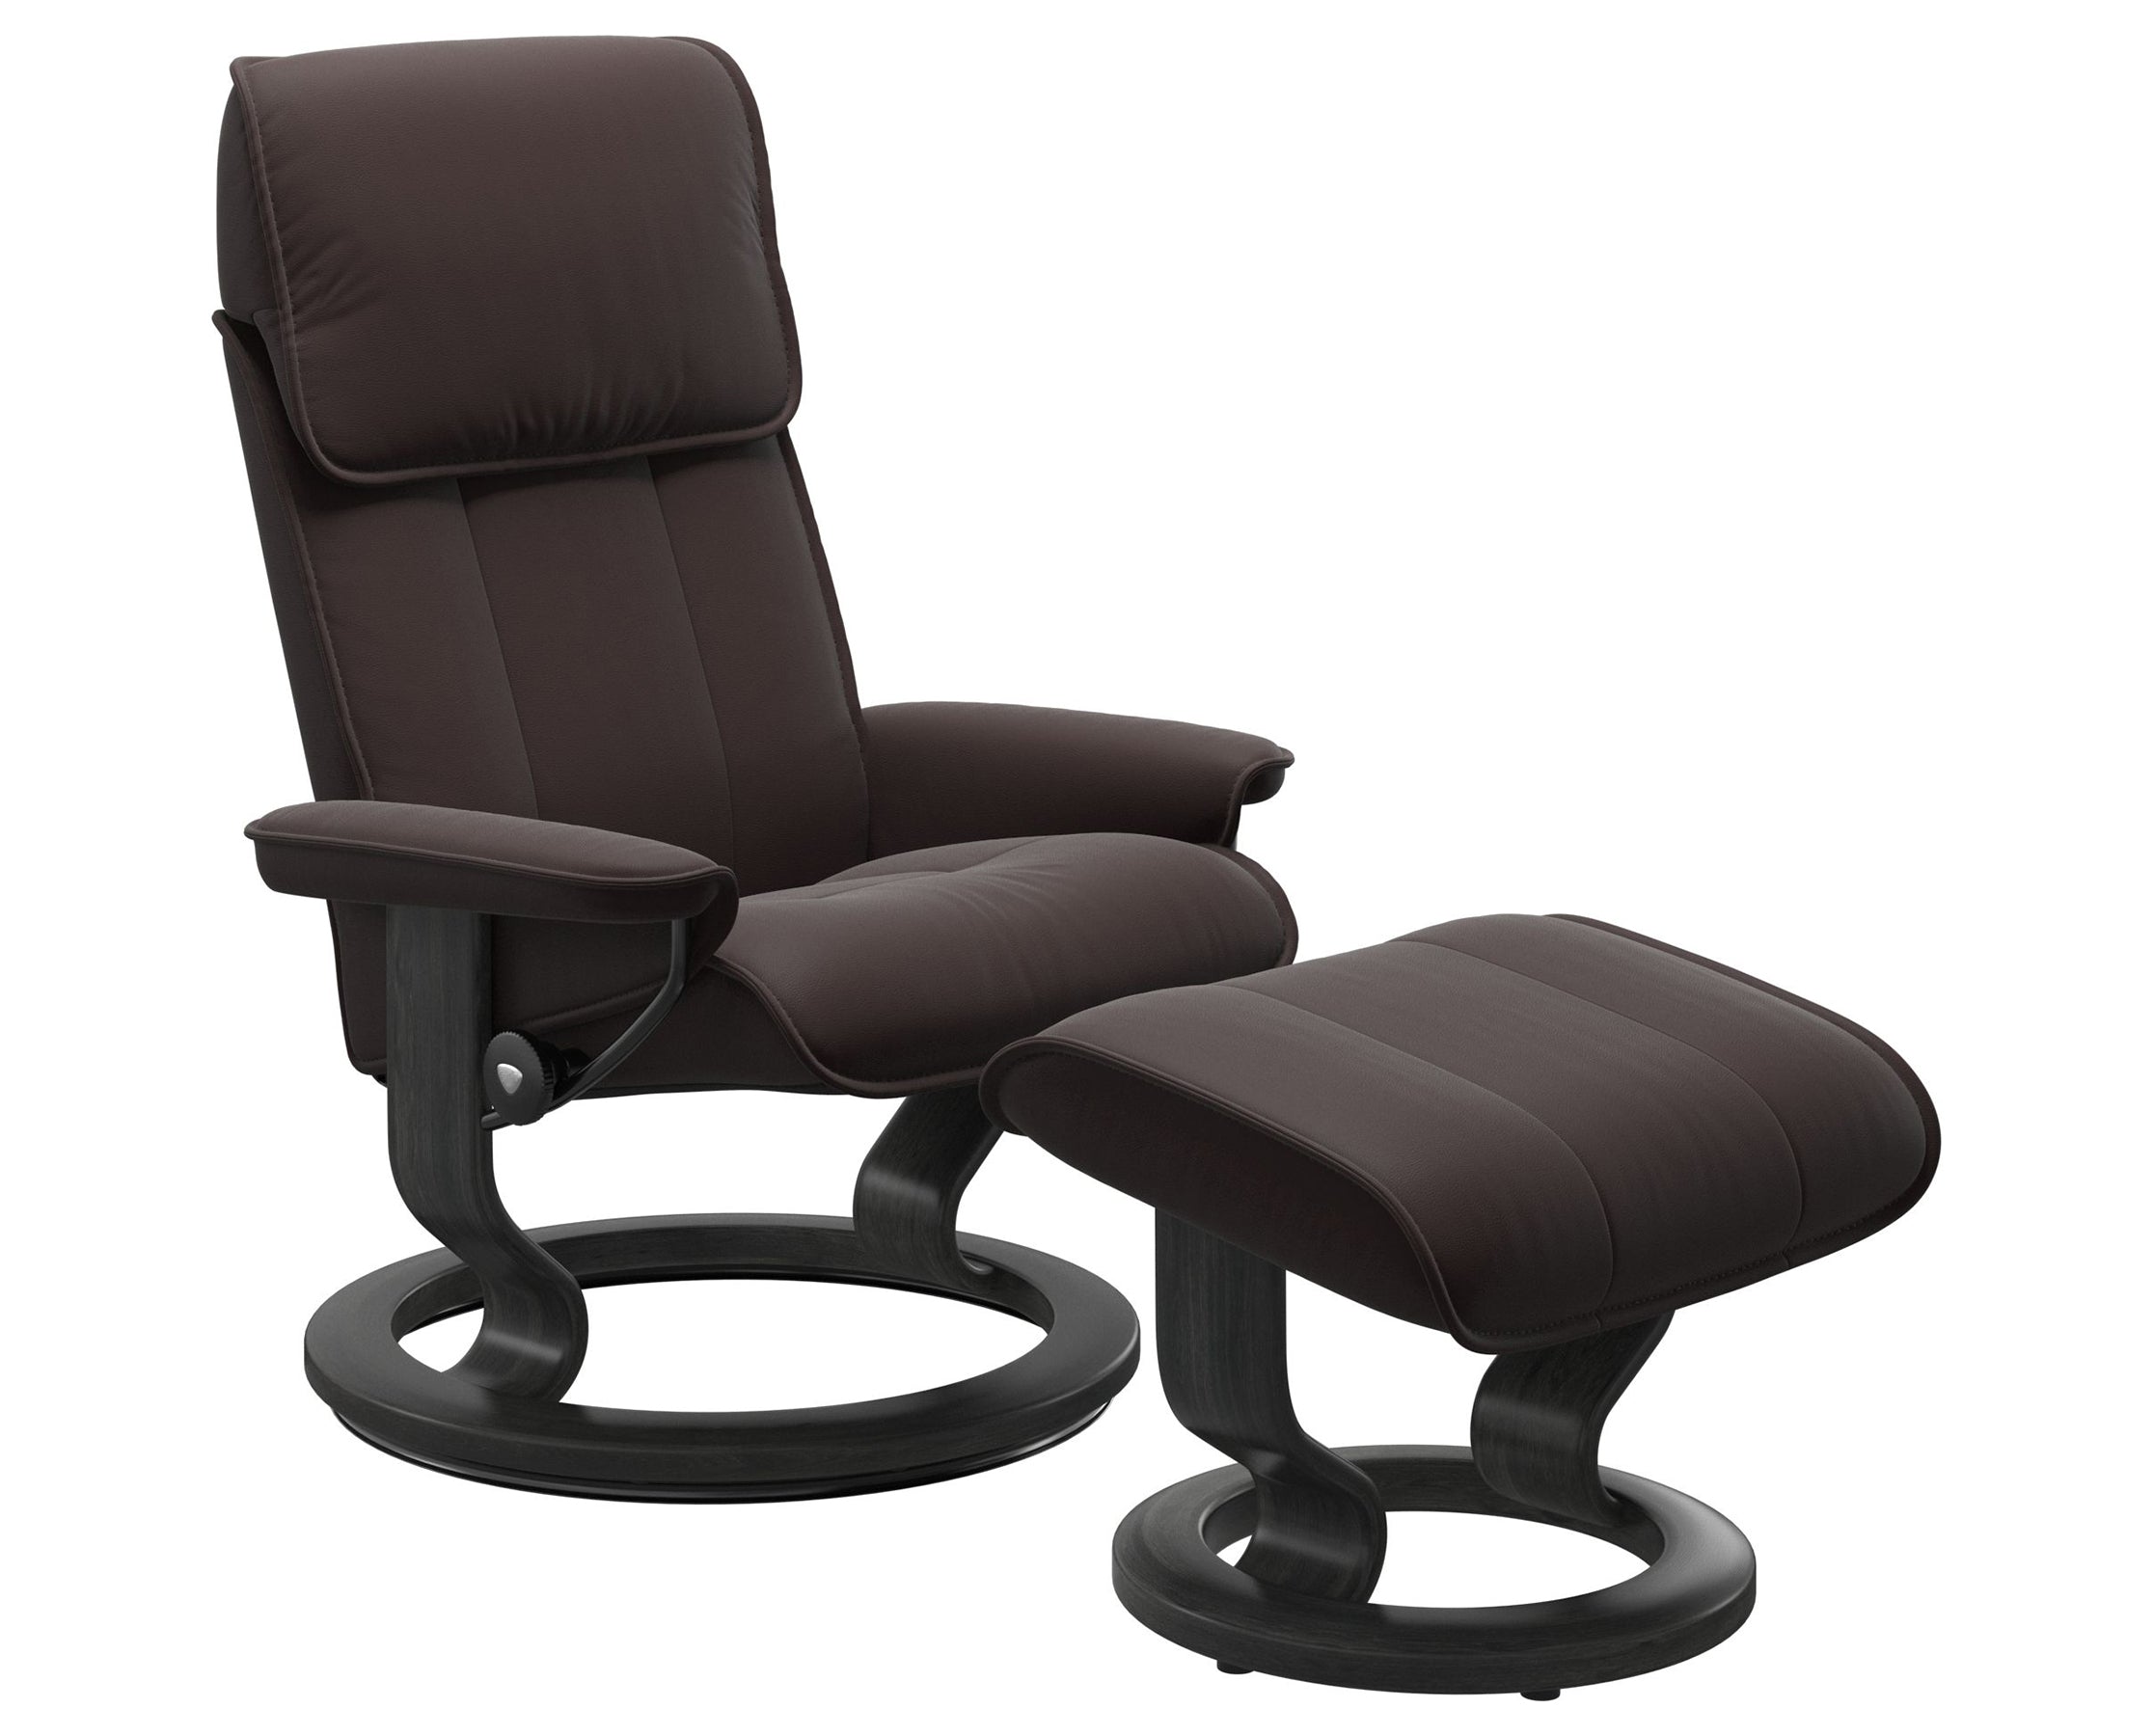 Paloma Leather Chocolate M/L and Grey Base | Stressless Admiral Classic Recliner | Valley Ridge Furniture